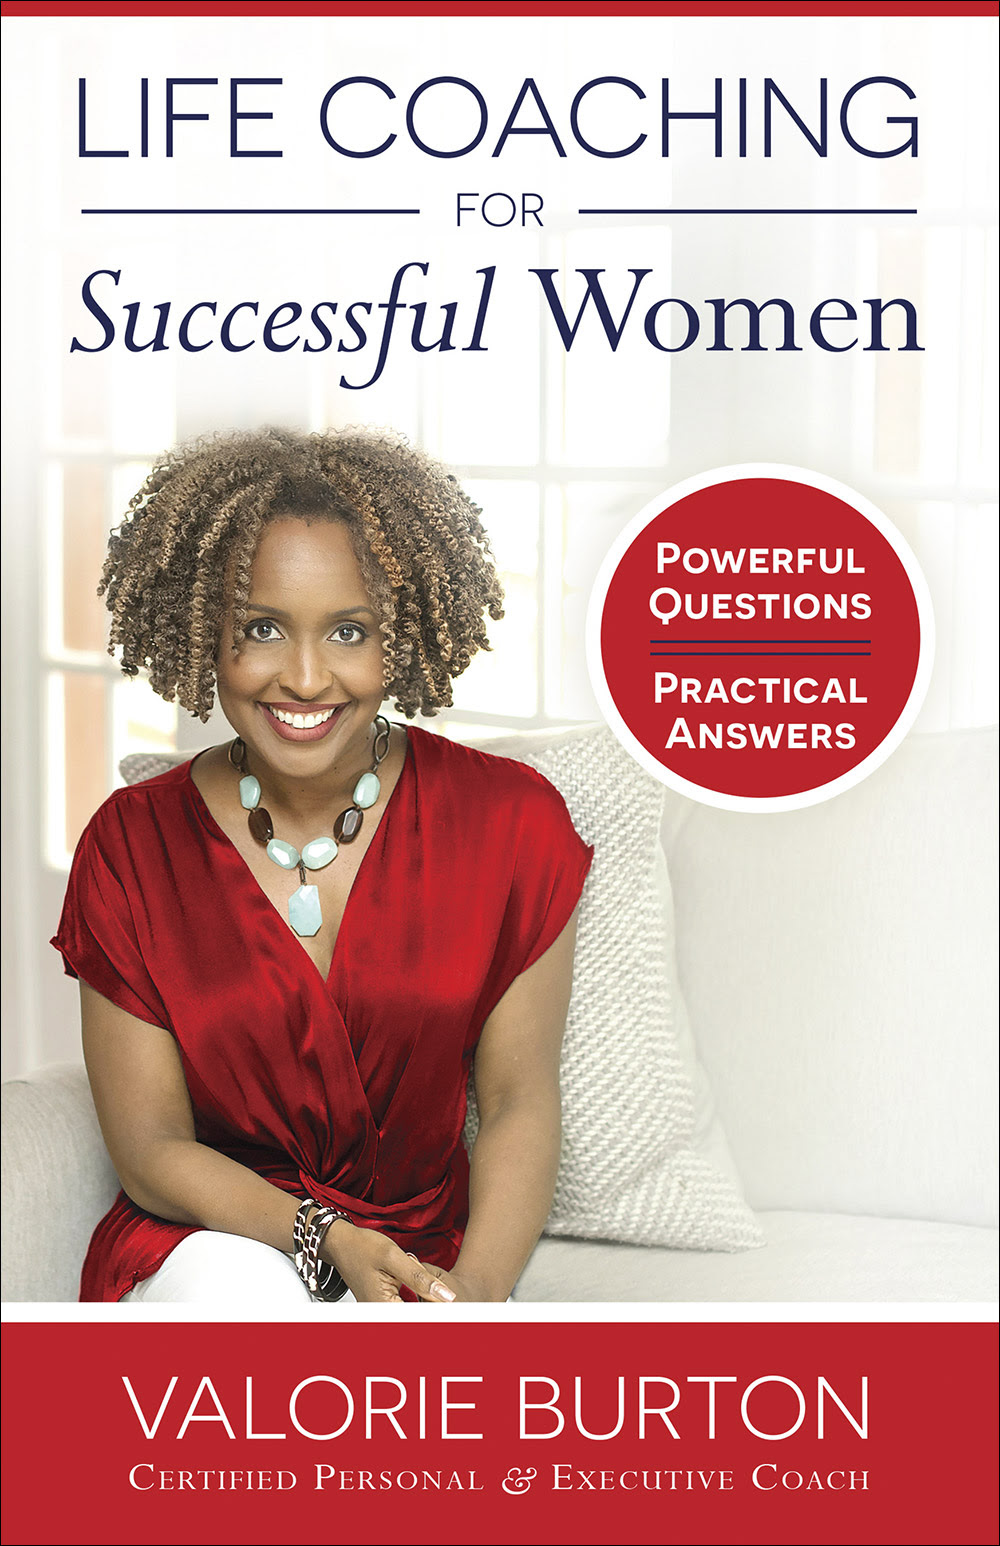 Life Coaching for Successful Women: Powerful Questions, Practical Answers in Kindle/PDF/EPUB